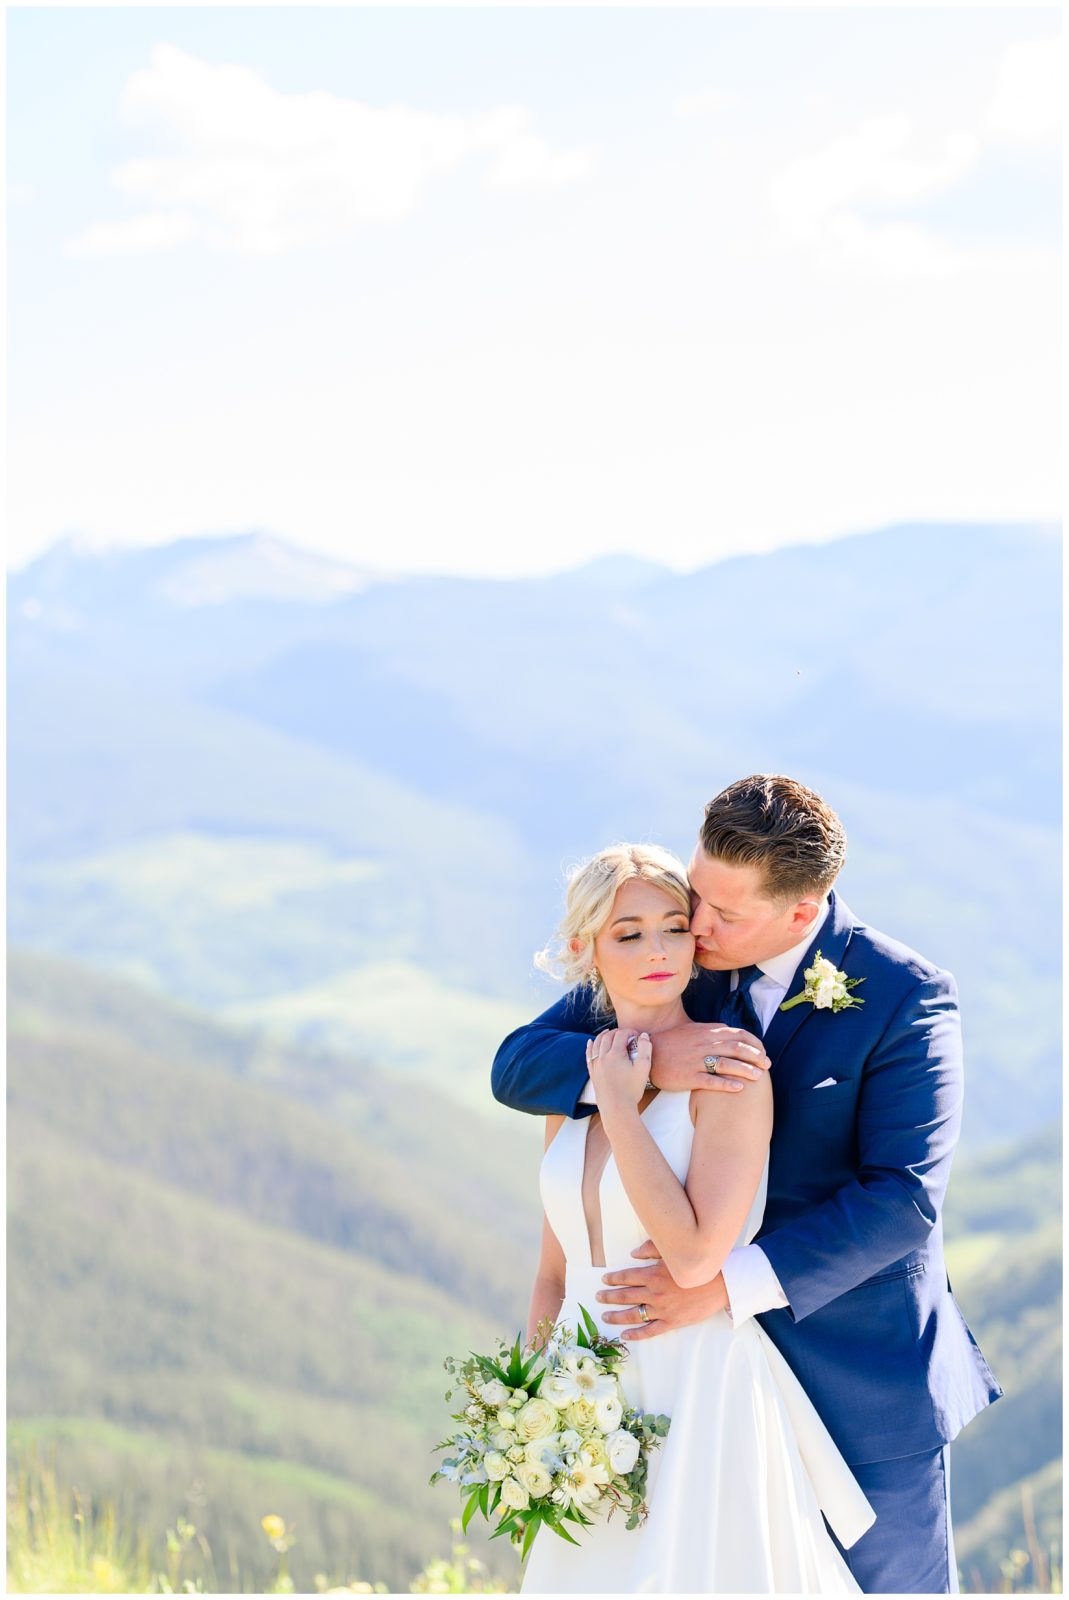 Best wedding photographers for Vail, Colorado